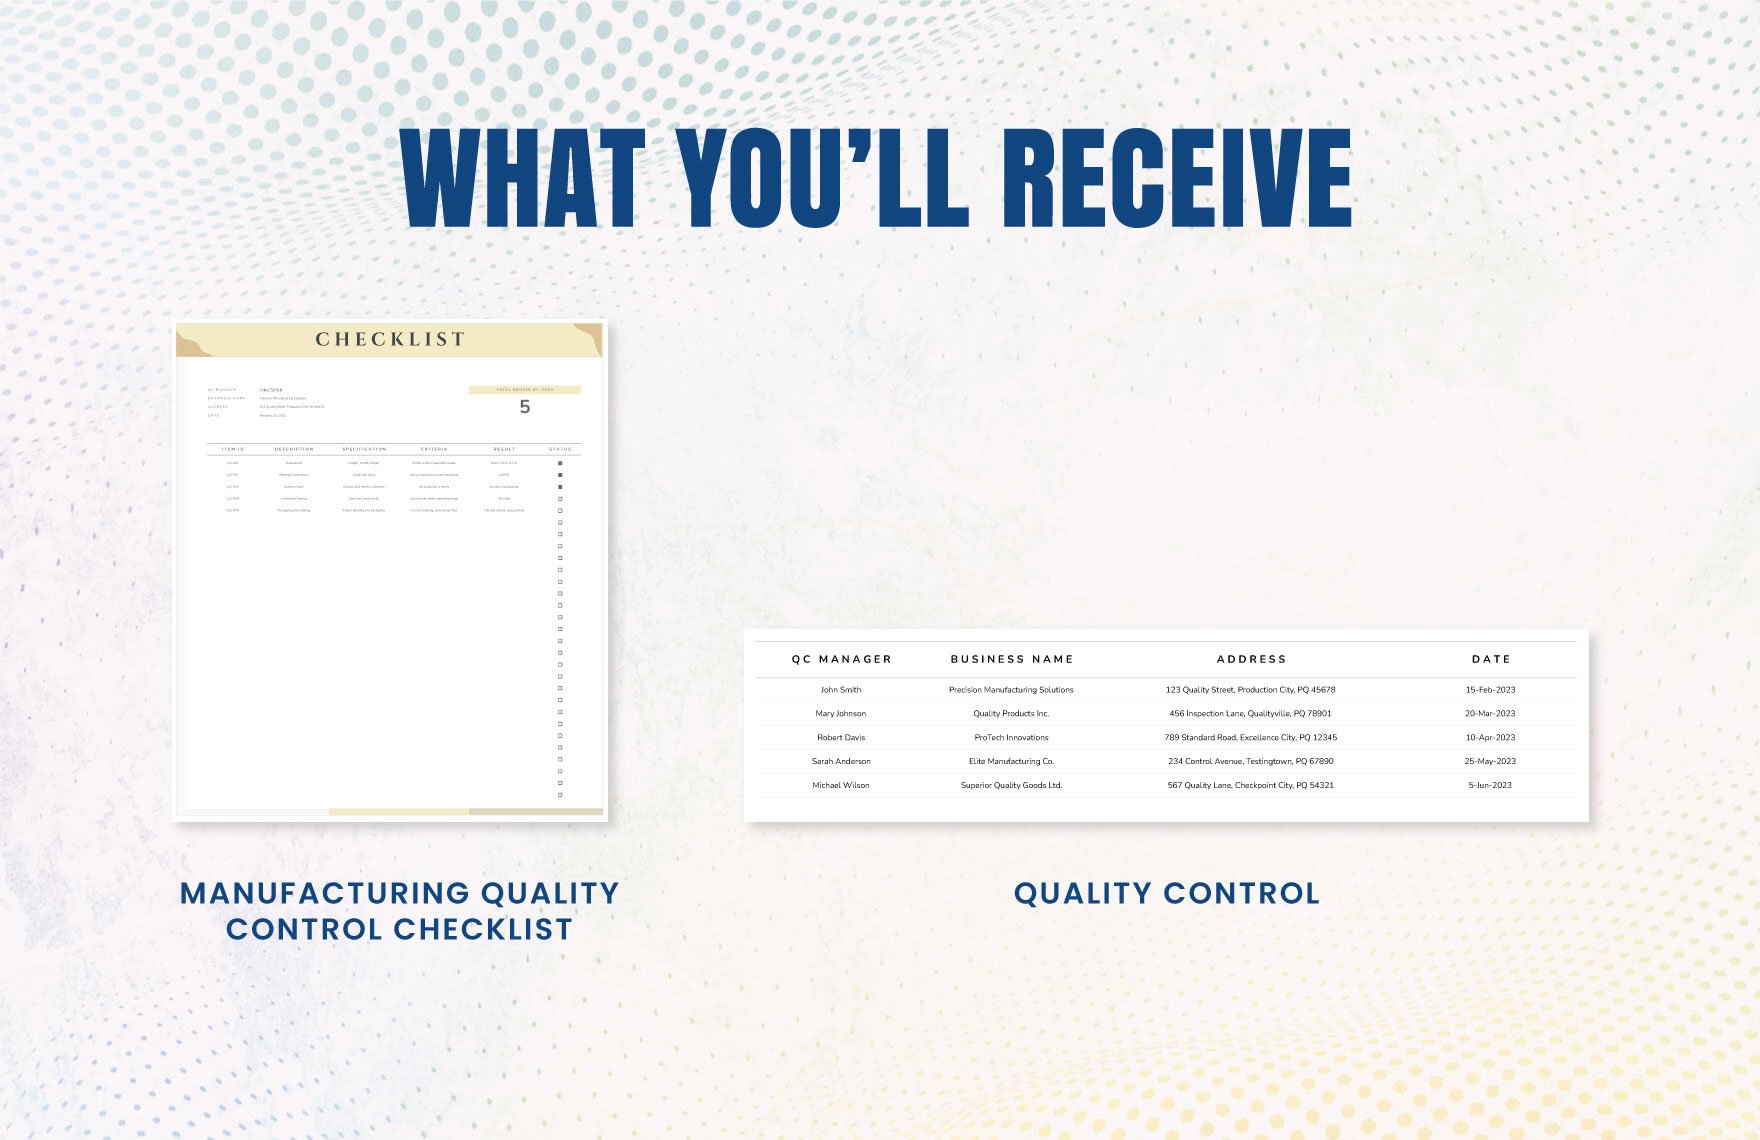 Manufacturing Quality Control Checklist Template